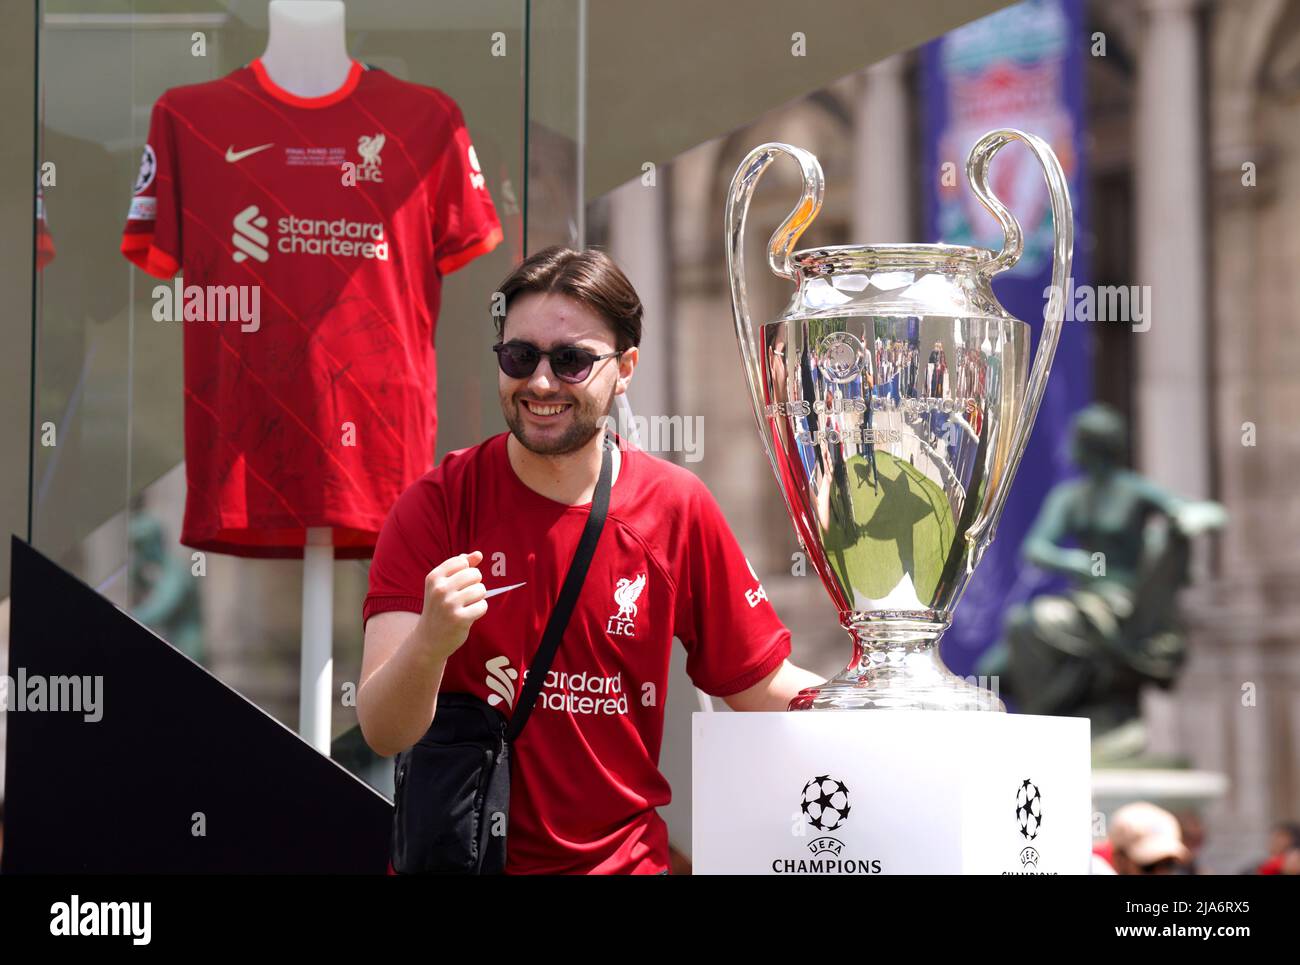 A Liverpool fan poses with the Champions League trophy at the Trophy Experience held at the Hotel de Ville, ahead of the UEFA Champions League Final at the Stade de France, Paris. Picture date: Saturday May 28, 2022. Stock Photo